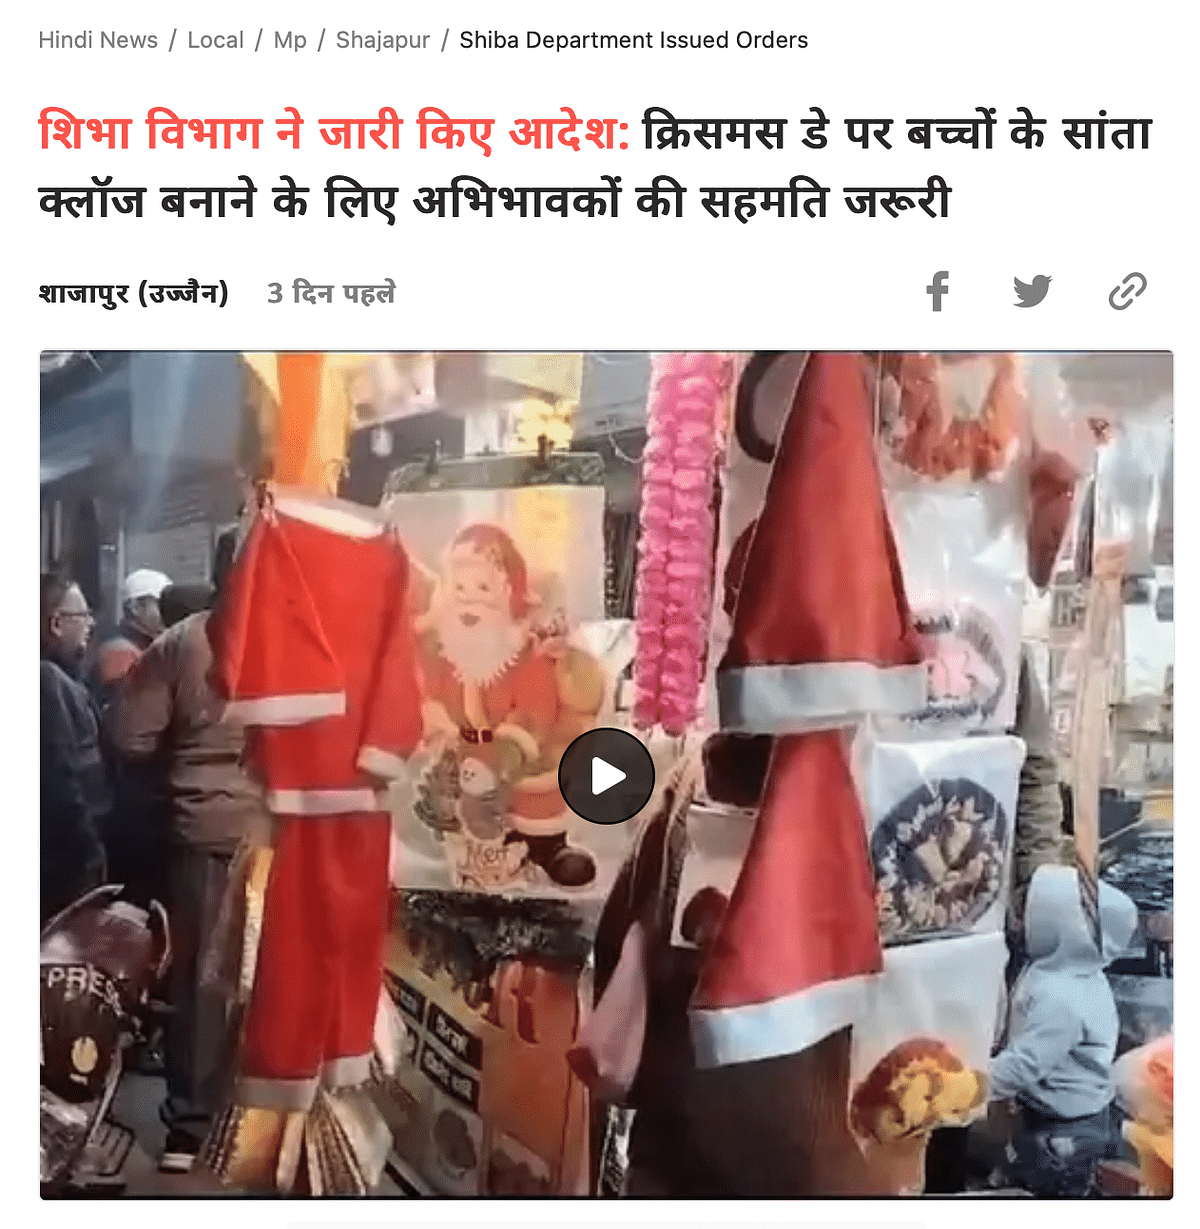 There is no announcement about action against private schools in MP for dressing students up as Santa Claus.